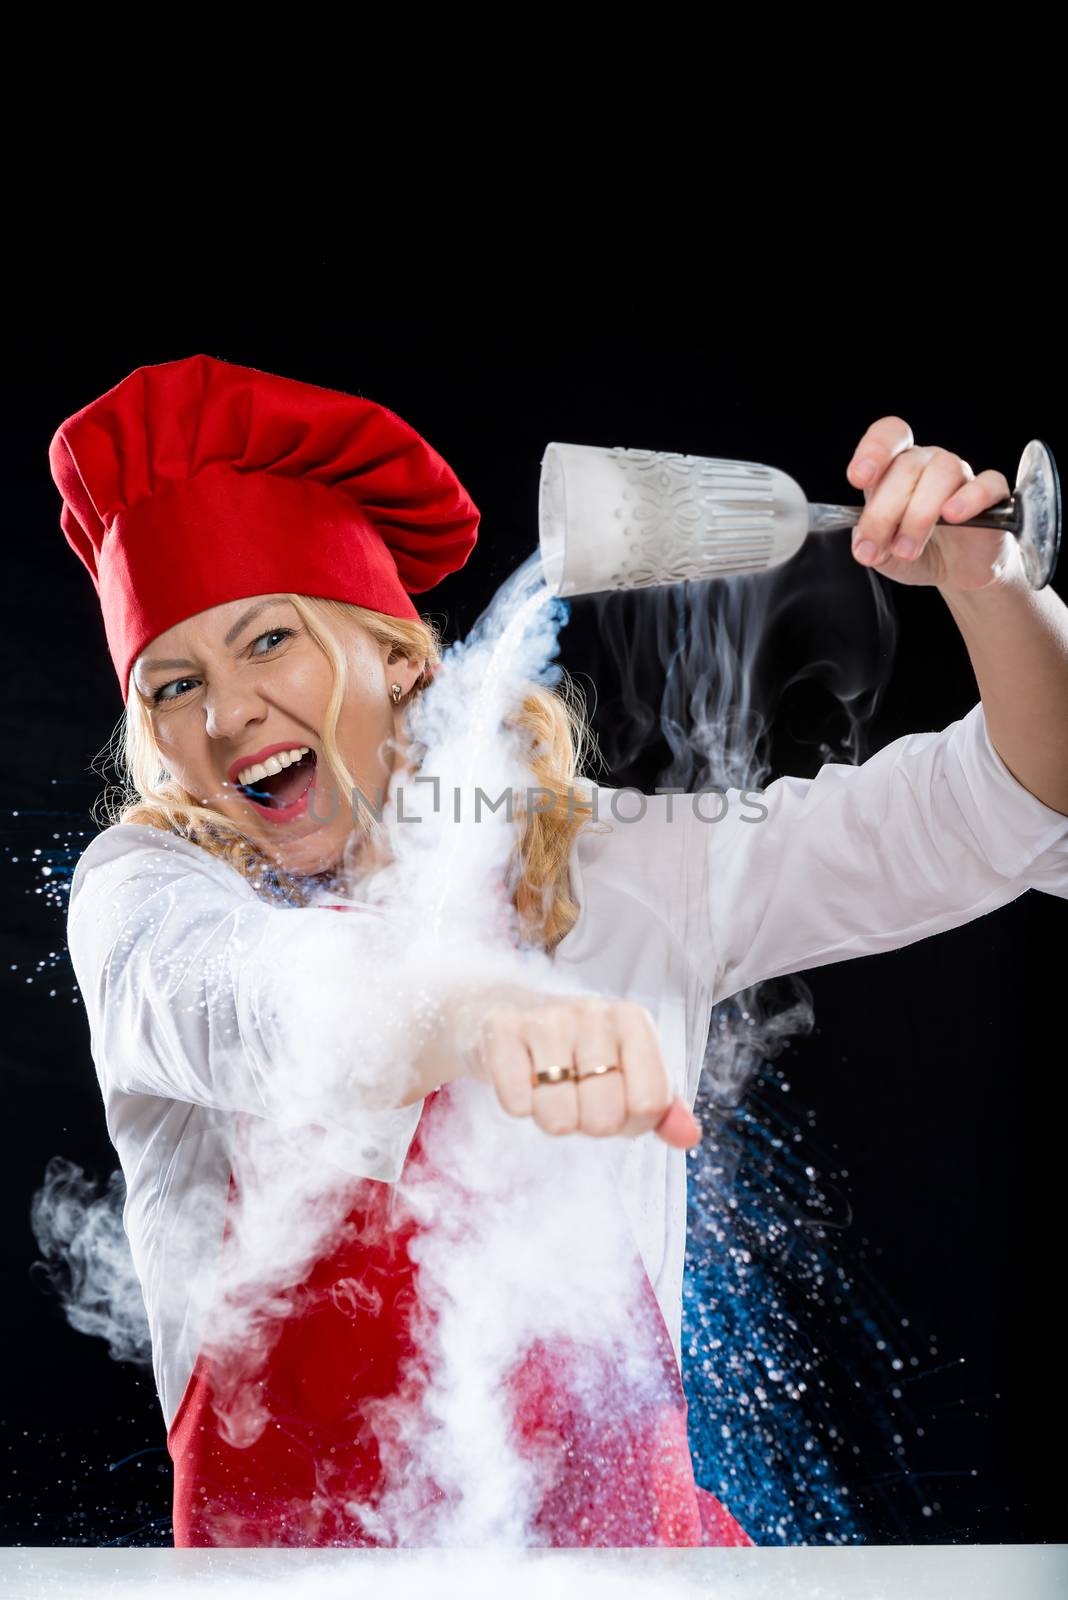 Animator woman cook doing an experiment with liquid nitrogen on a black background